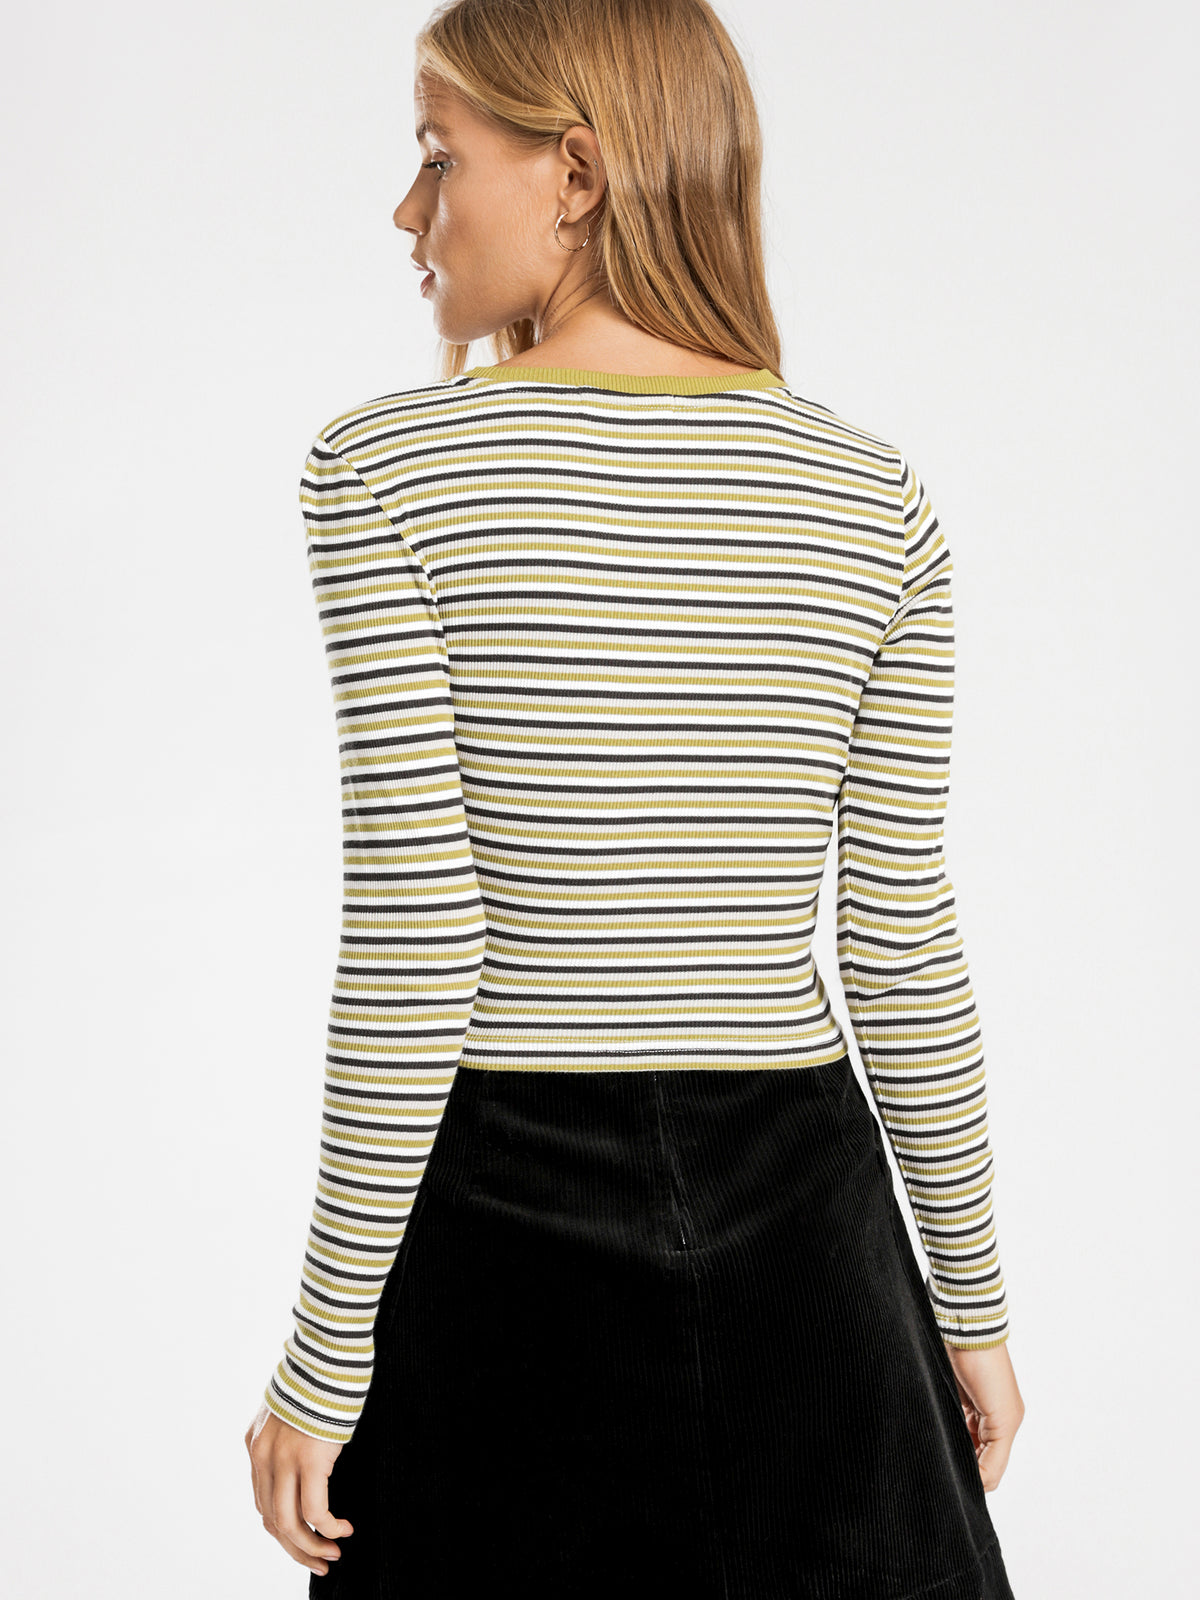 Haines Long Sleeve T-Shirt in Moss Stripe